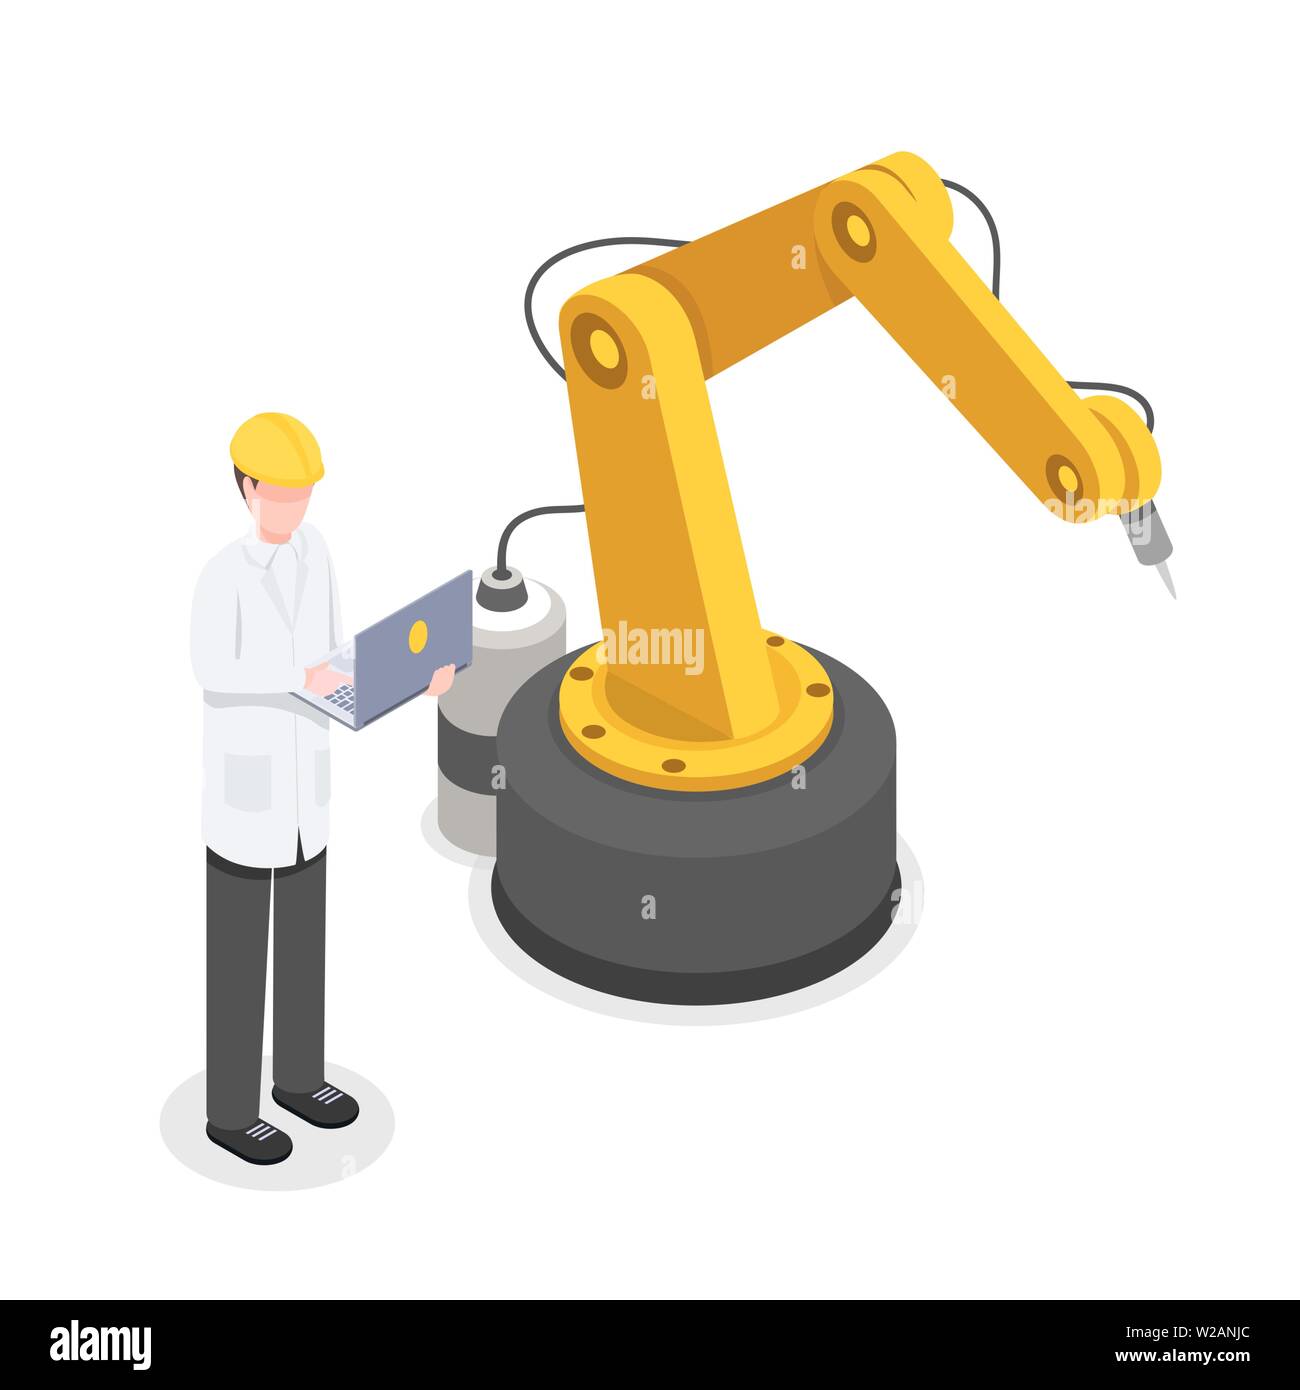 Engineer, programmer controlling robotic arm manually. Robotics, cybernetics scientist working with technology isometric vector illustration. Automated, preprogrammed production technology 3d concept Stock Vector